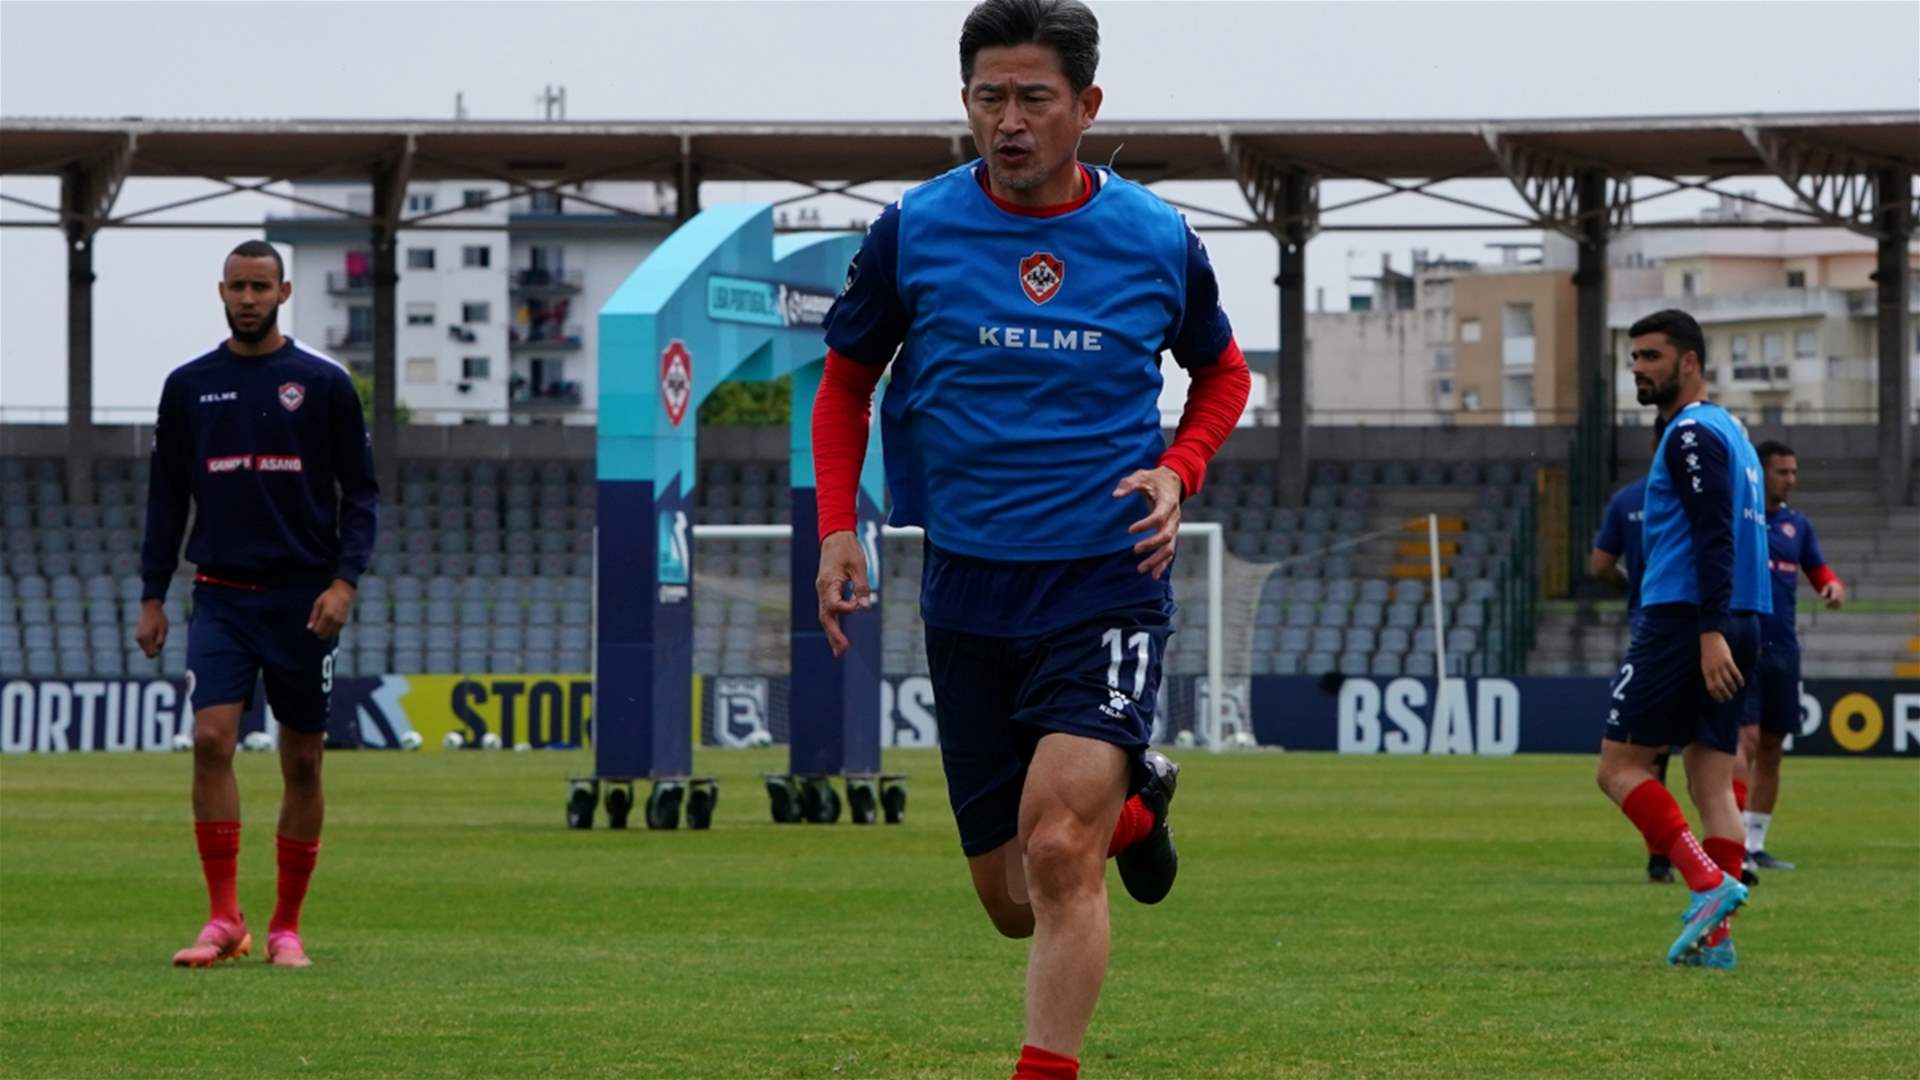 Japanese veteran Miura extends his football career in Portugal at the age of 56